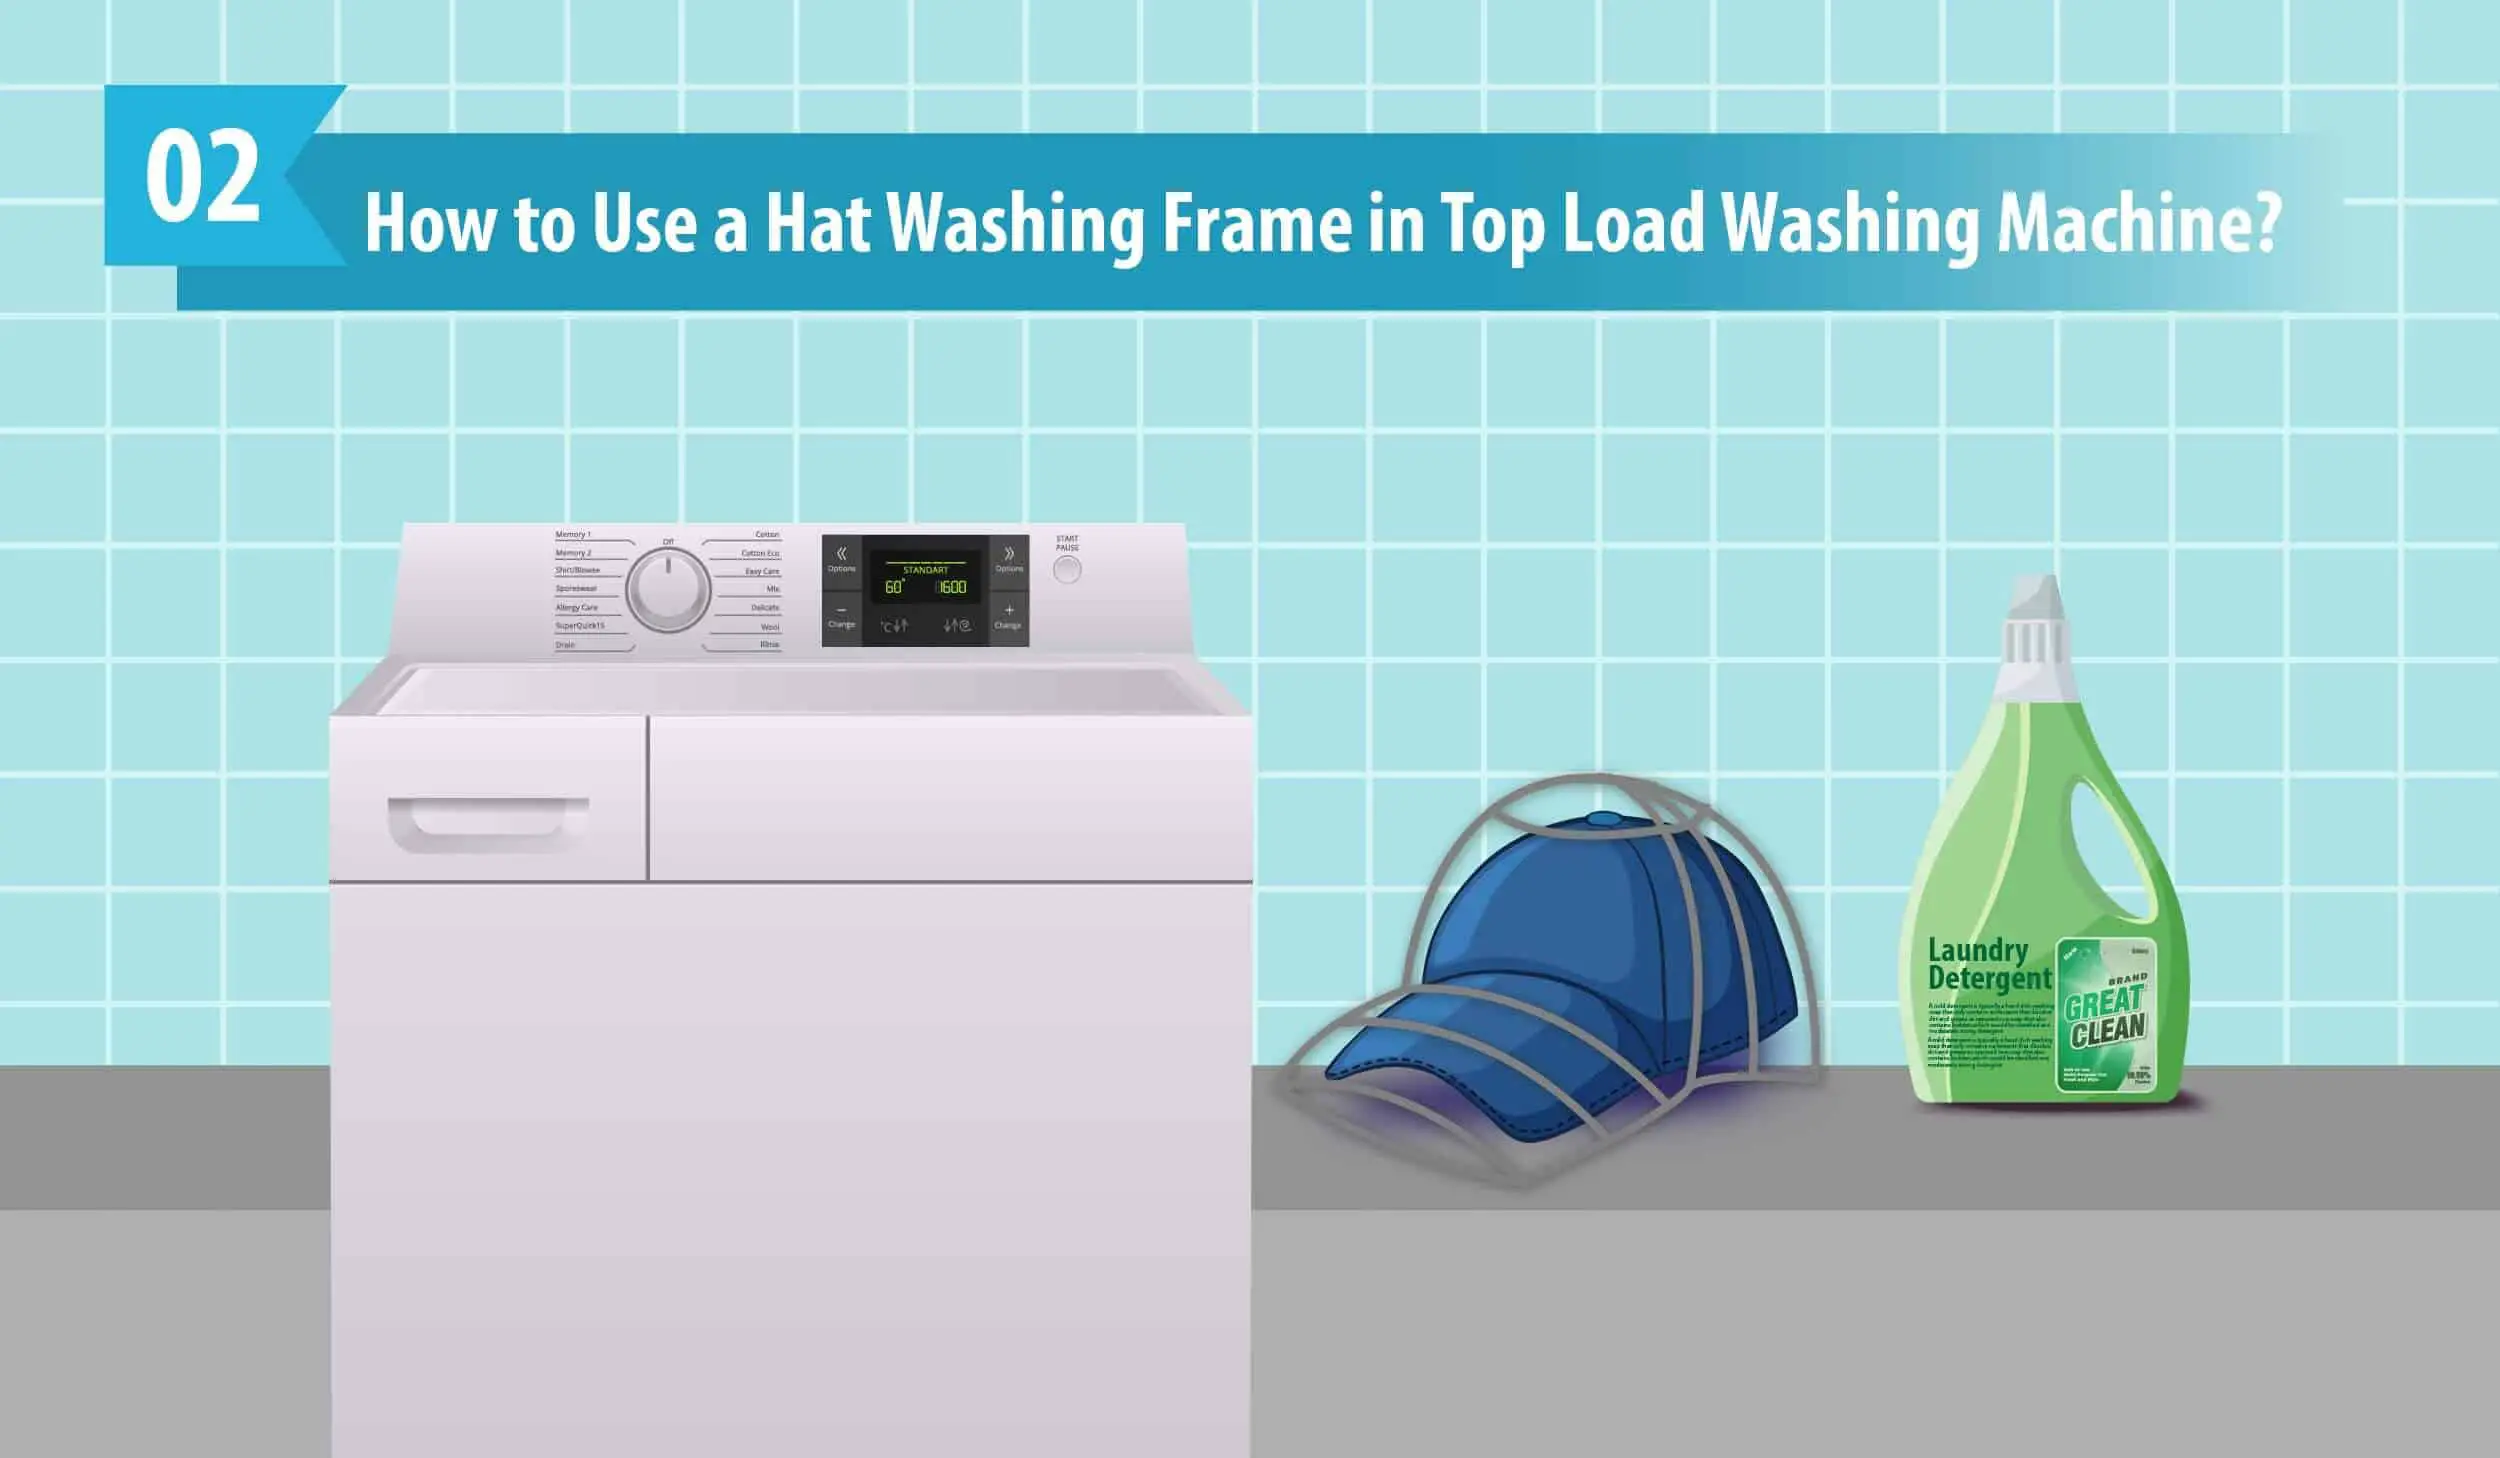 How to Use a Hat Washing Frame in Top Load Washing Machine